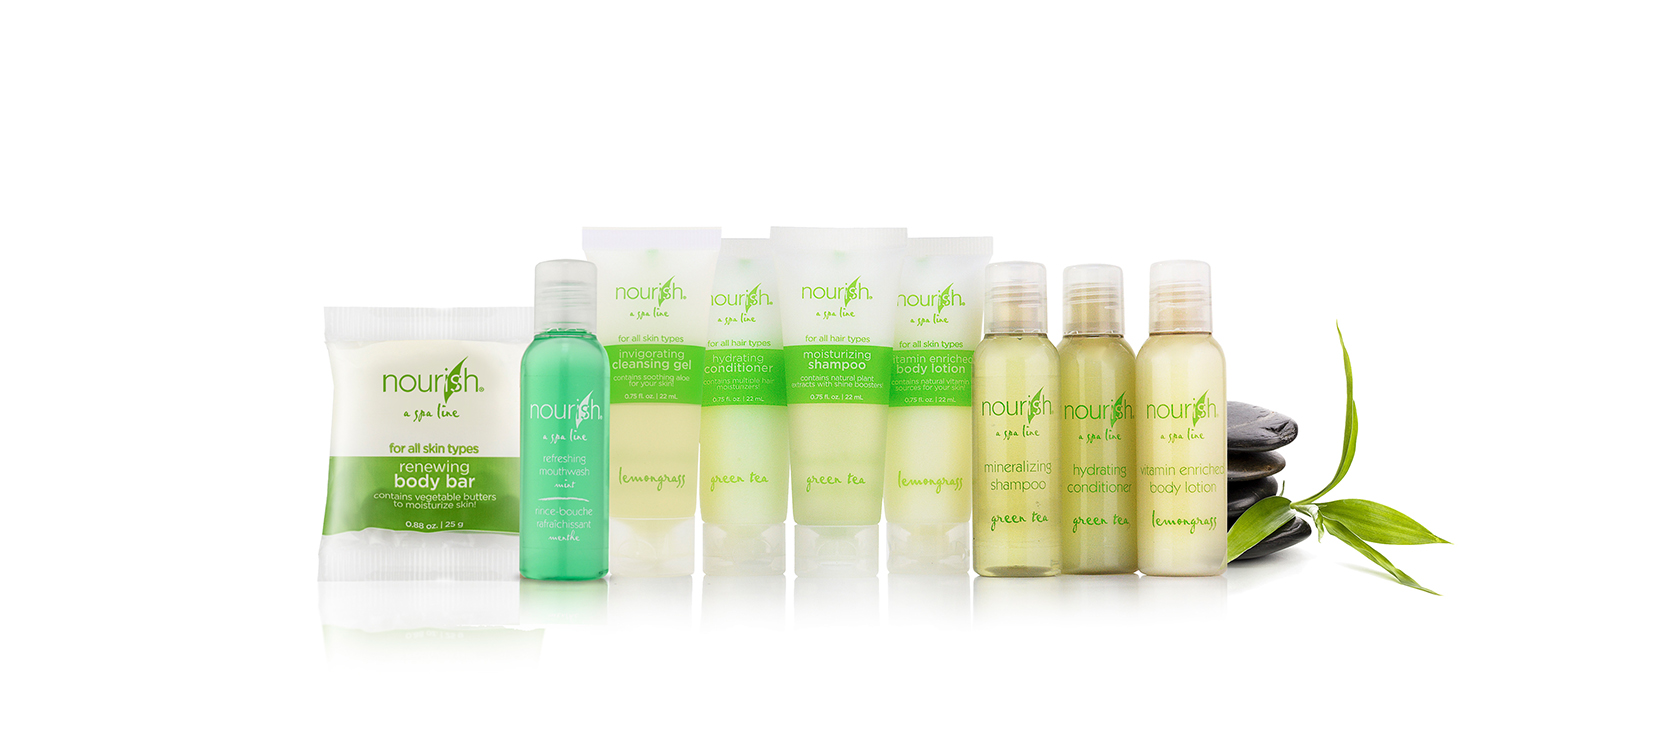 Nourish hair products